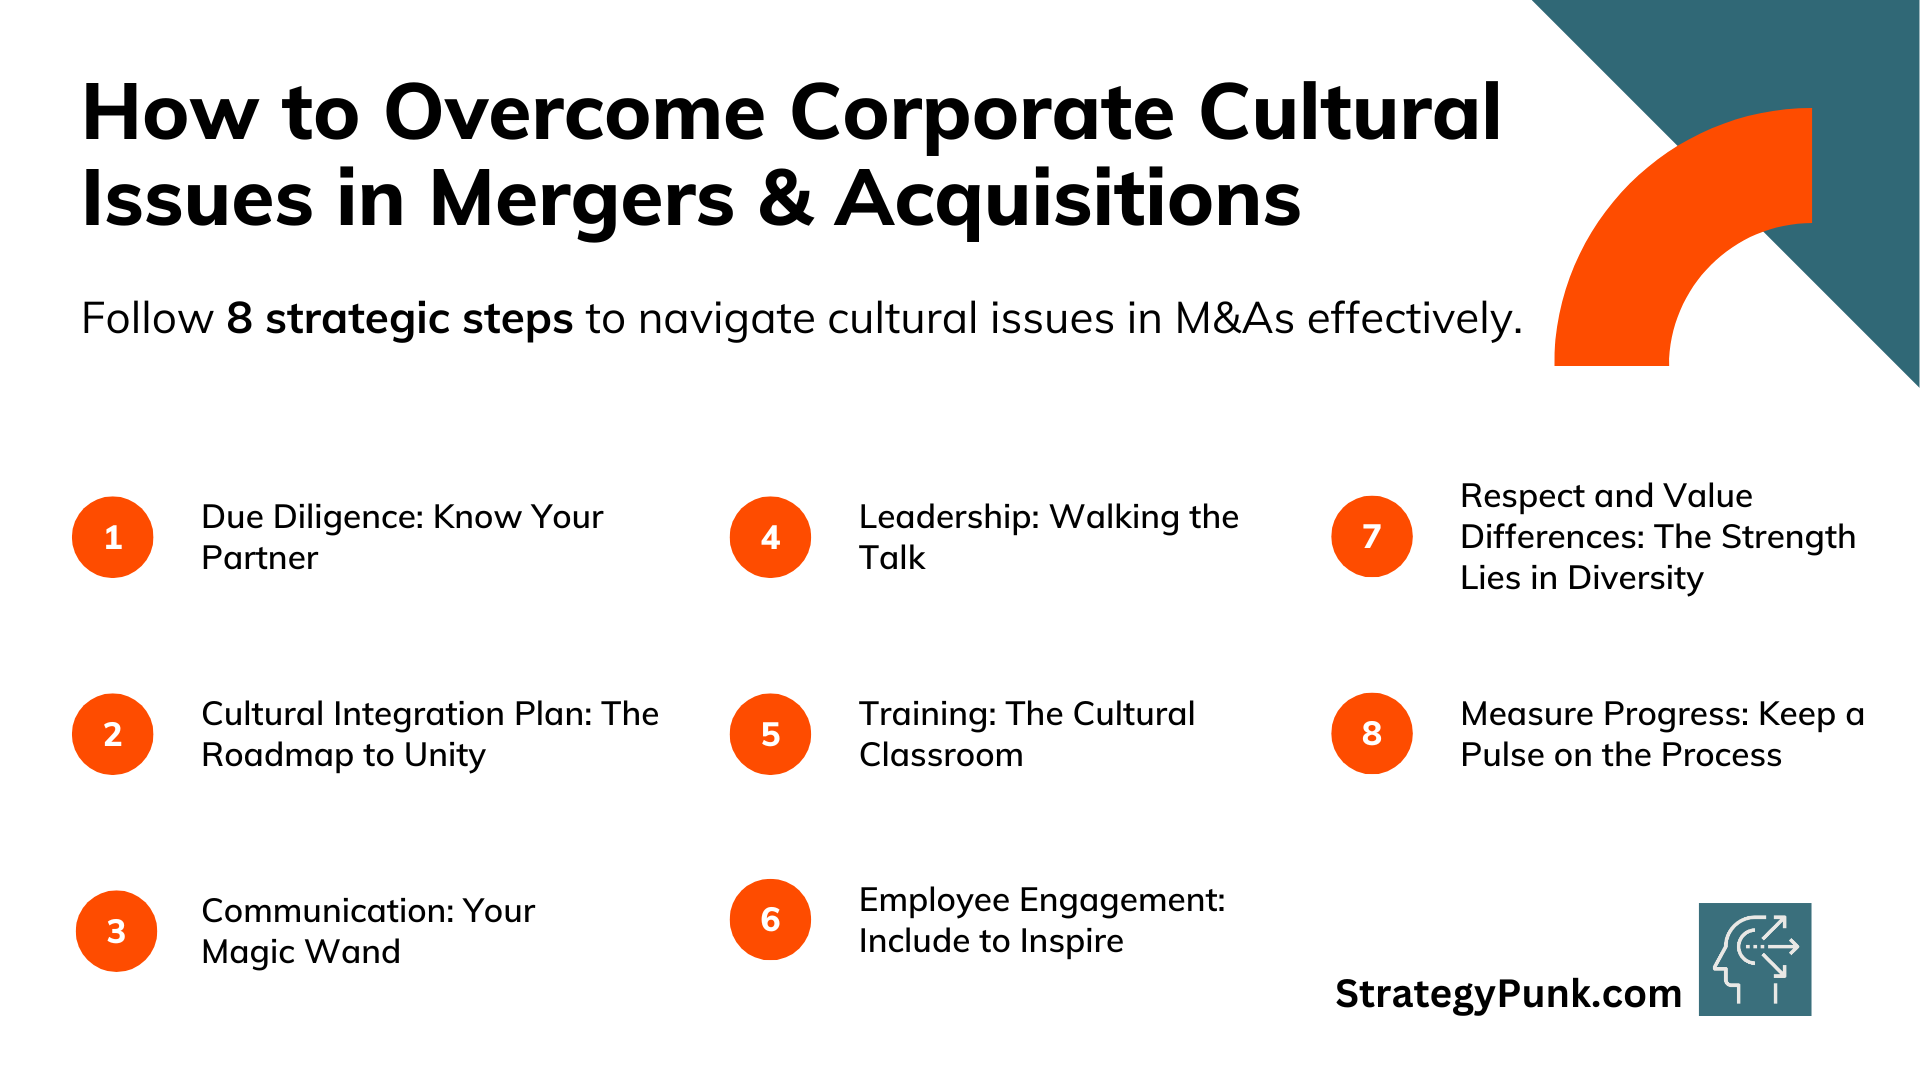 How to Overcome Corporate Cultural Issues in Mergers & Acquisitions